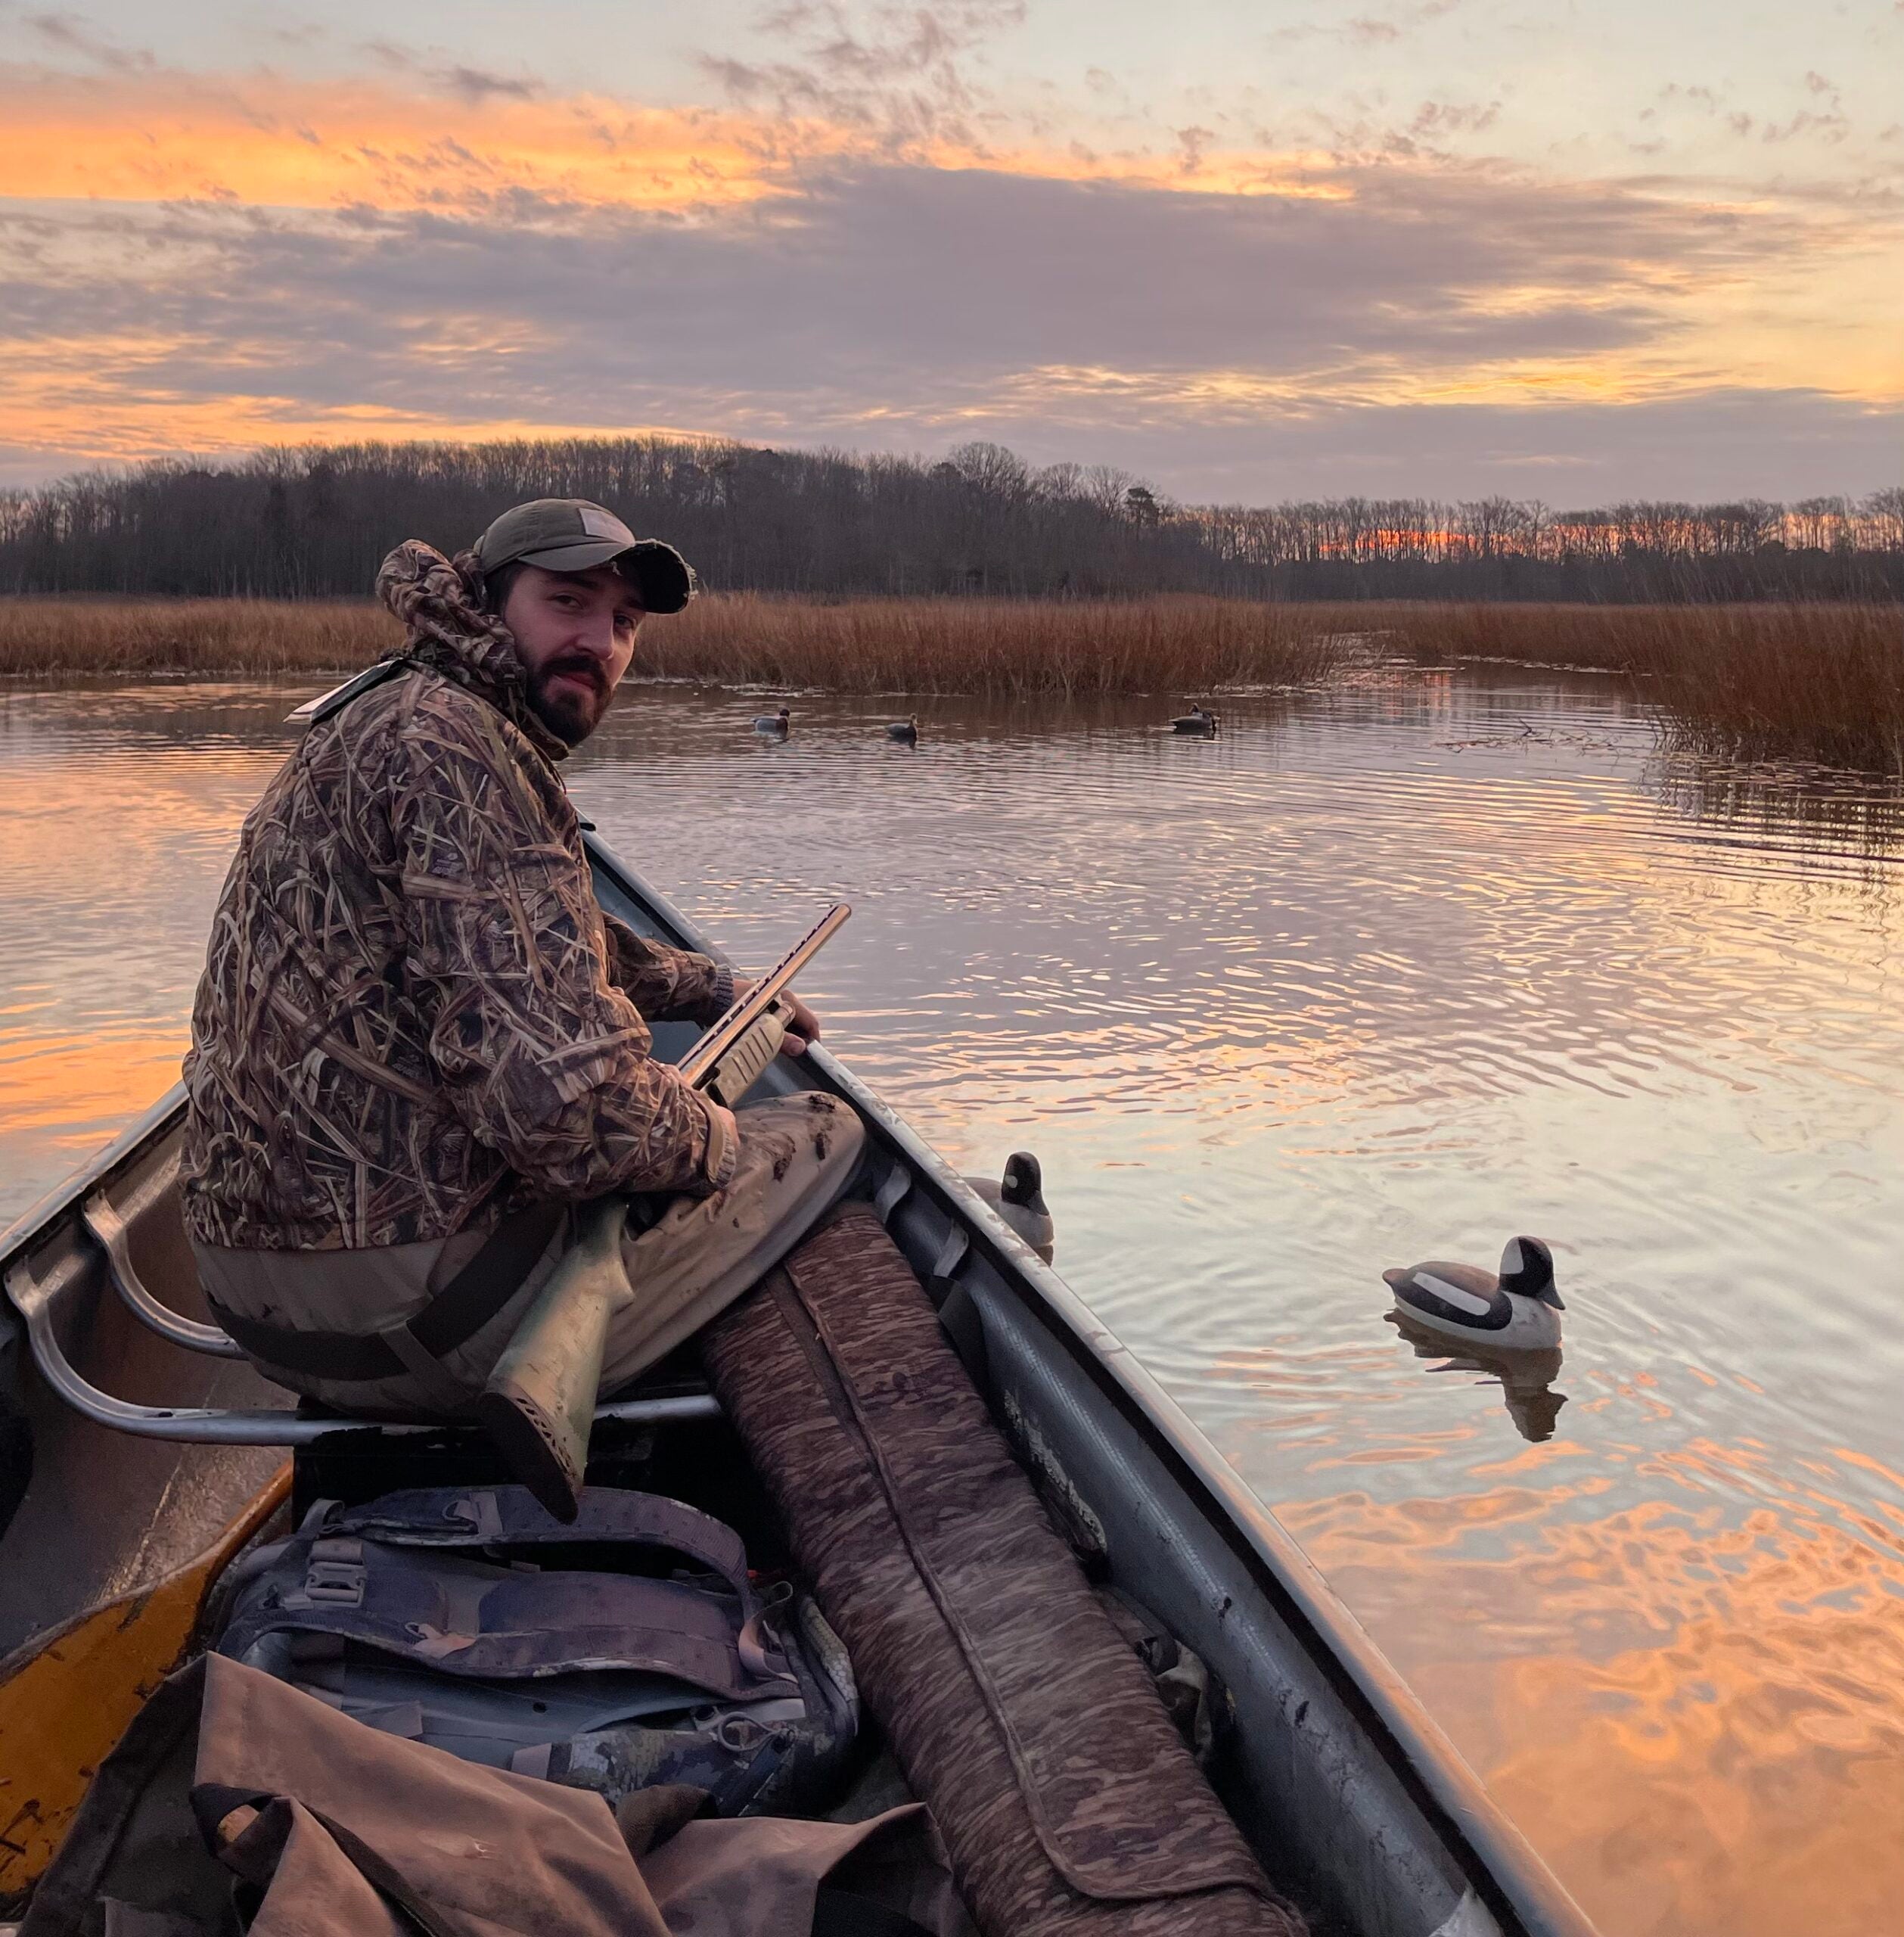 Man hunting waterfowl on a pond from a canoe with duck decoys nearby